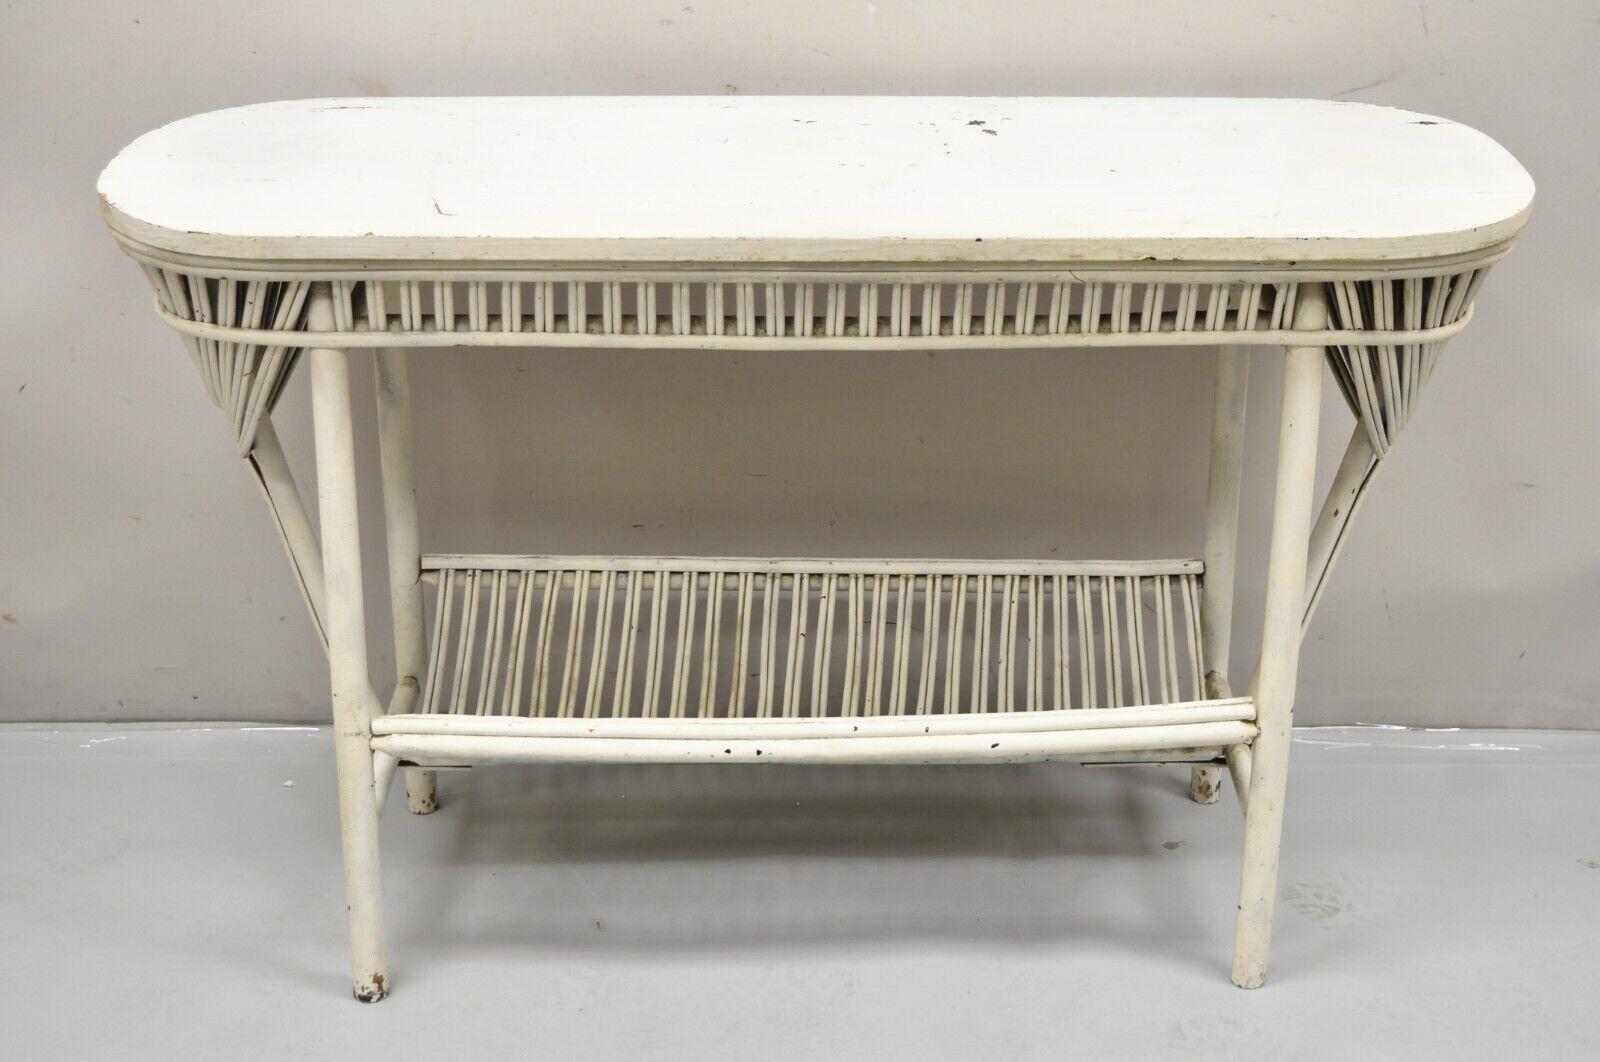 Antique Victorian Bentwood Sculptural Wicker Rattan White Sunroom Console Hall Table. Item features a magazine holder base, oval top, sculptural bentwood details, very nice antique item. Circa Early 1900s. Measurements: 29